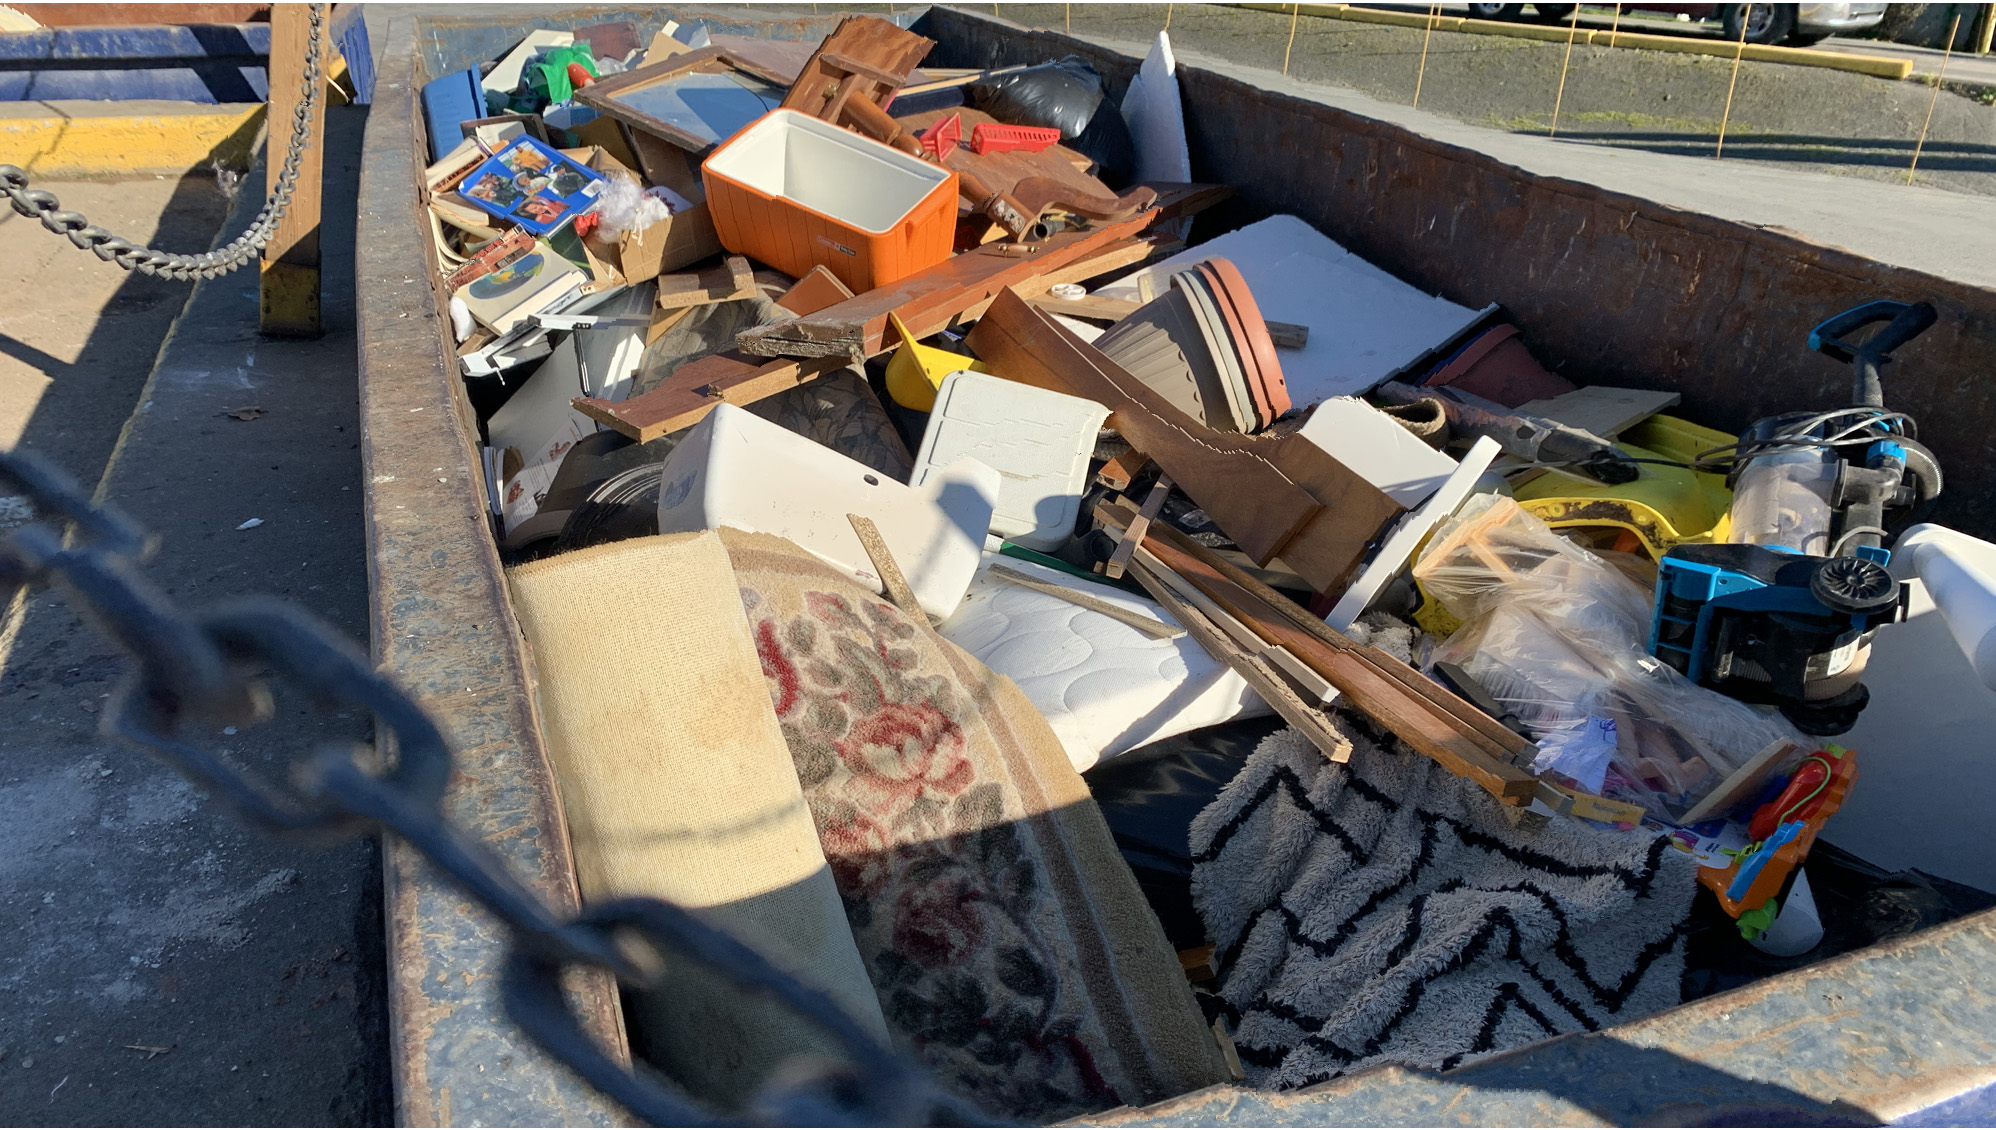 Garbage is seen in a dumpster at Otter Lake landfill on Nov. 6.